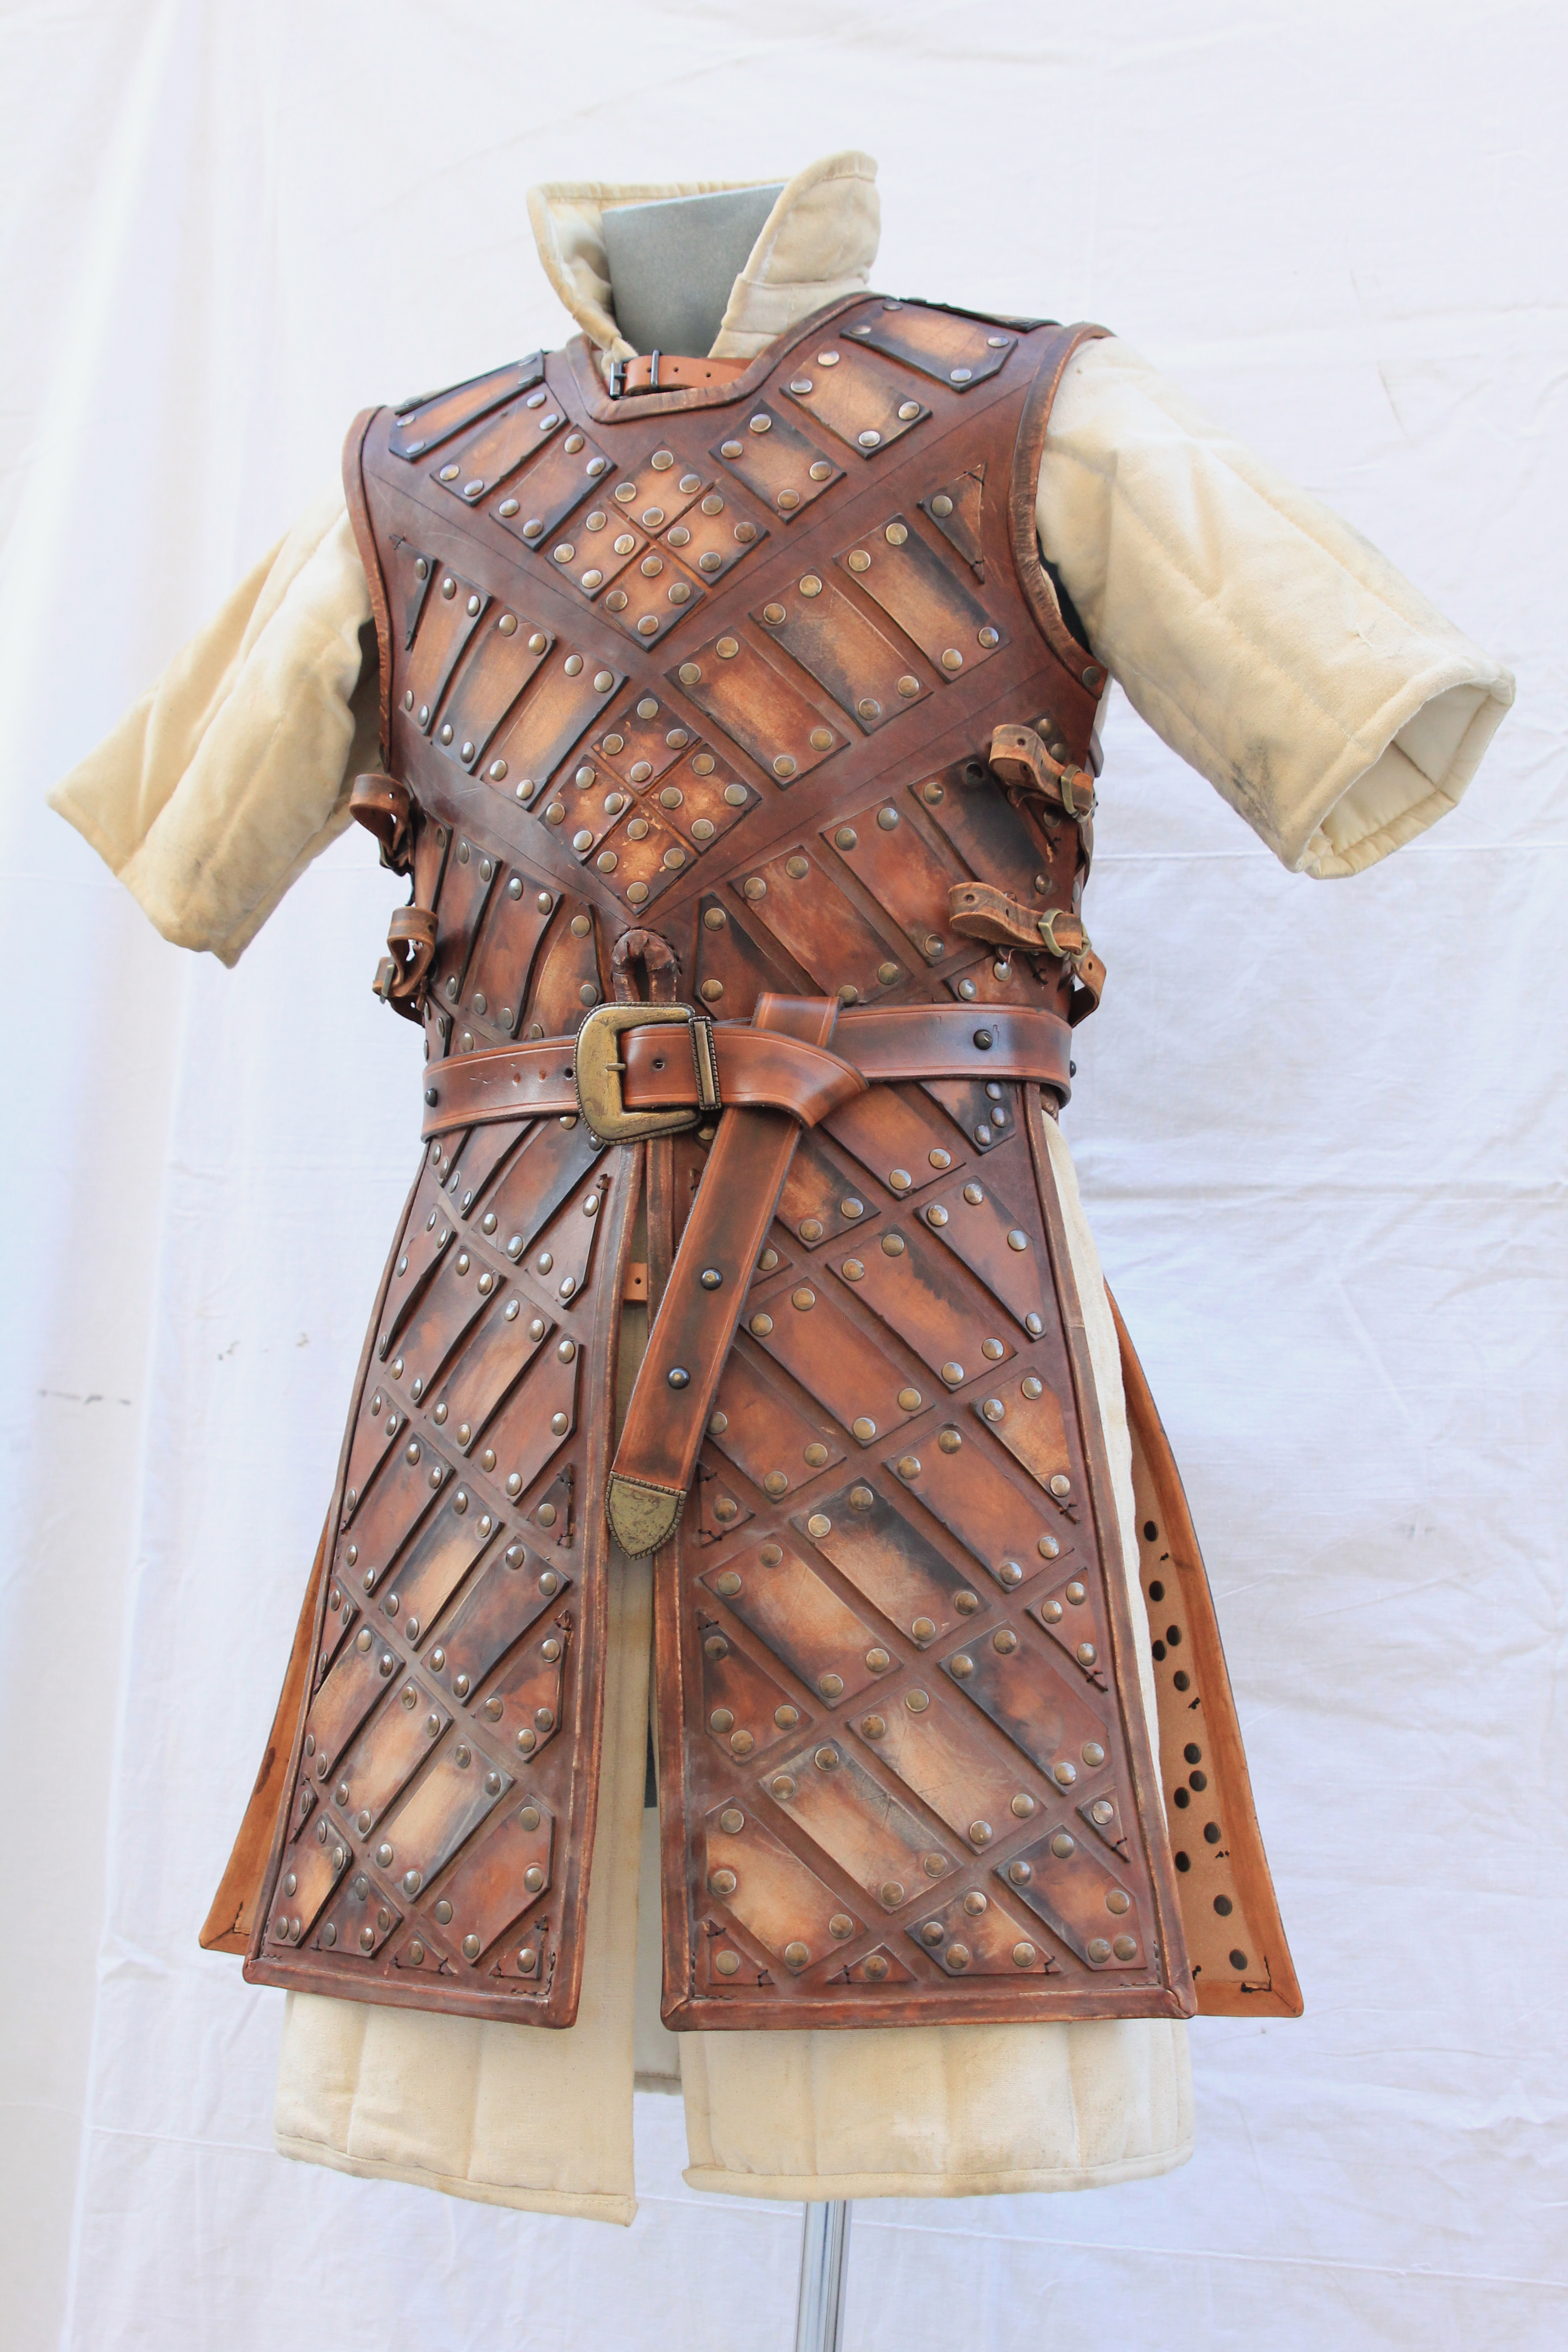 Details about   Medieval Roman Leather Jacket Body Armor Reenactment Cuirass Costume 